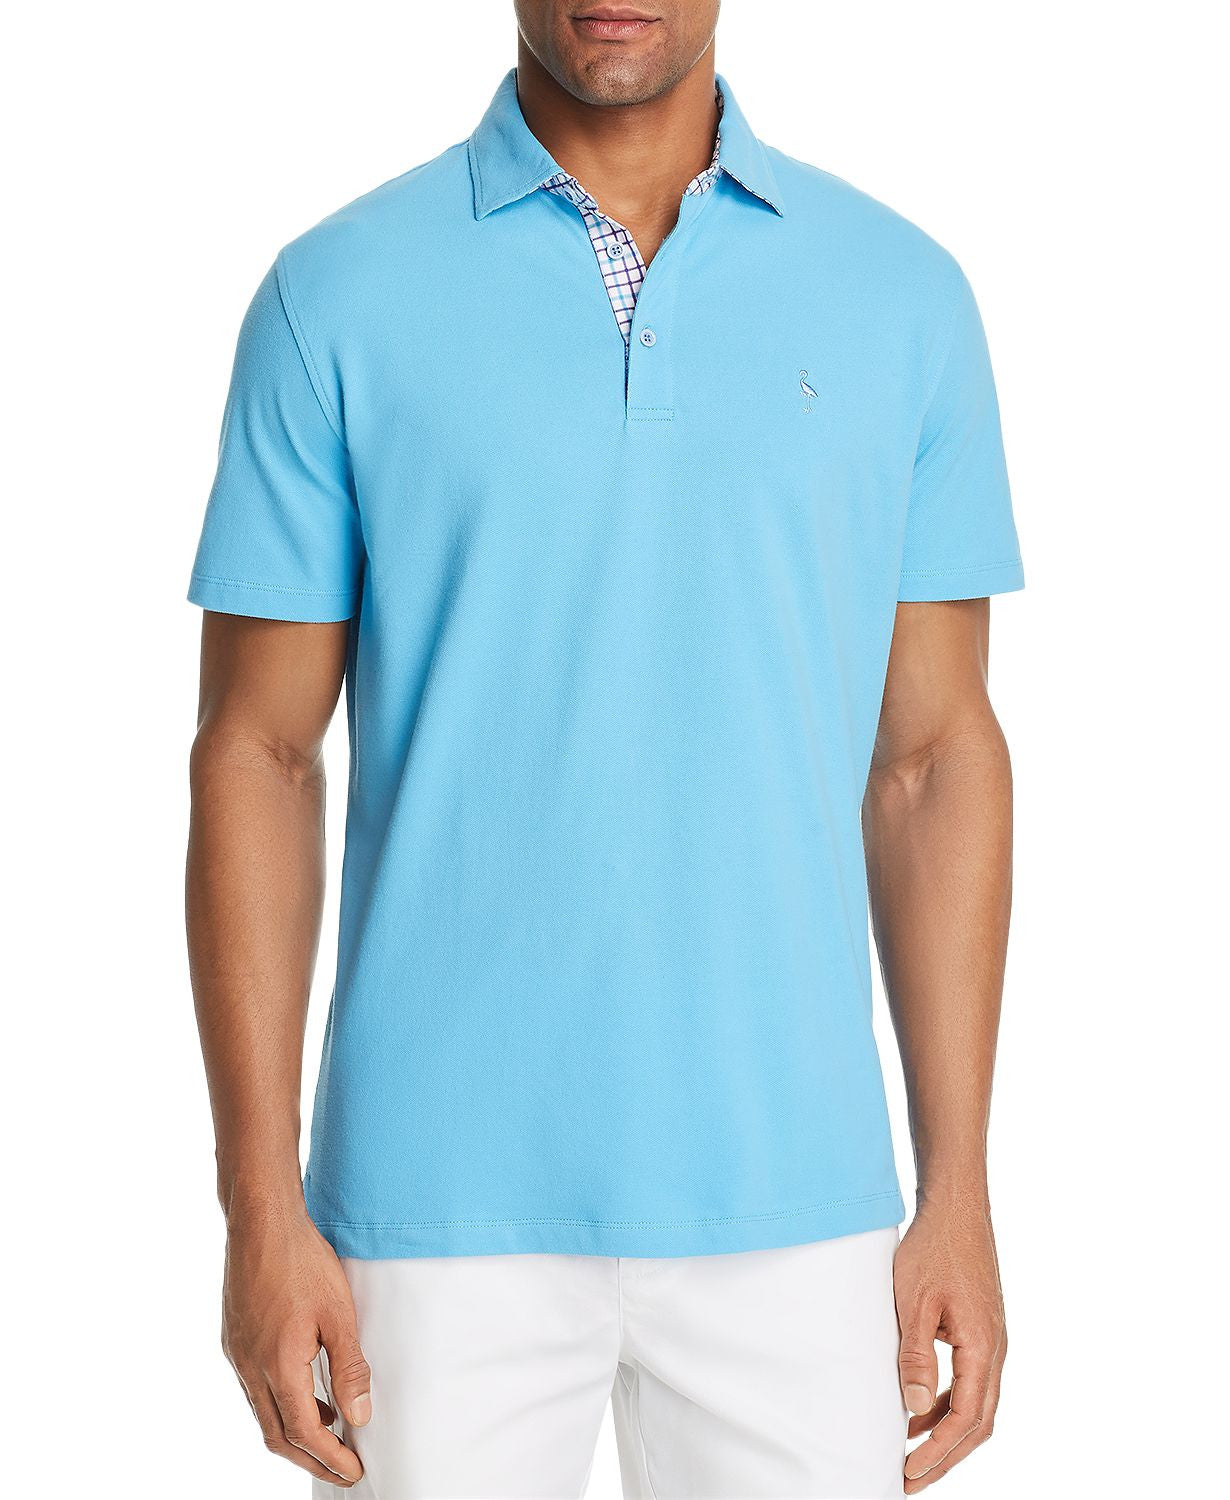 Tailorbyrd Hanley Piqué Classic Fit Polo Shirt Turquoise